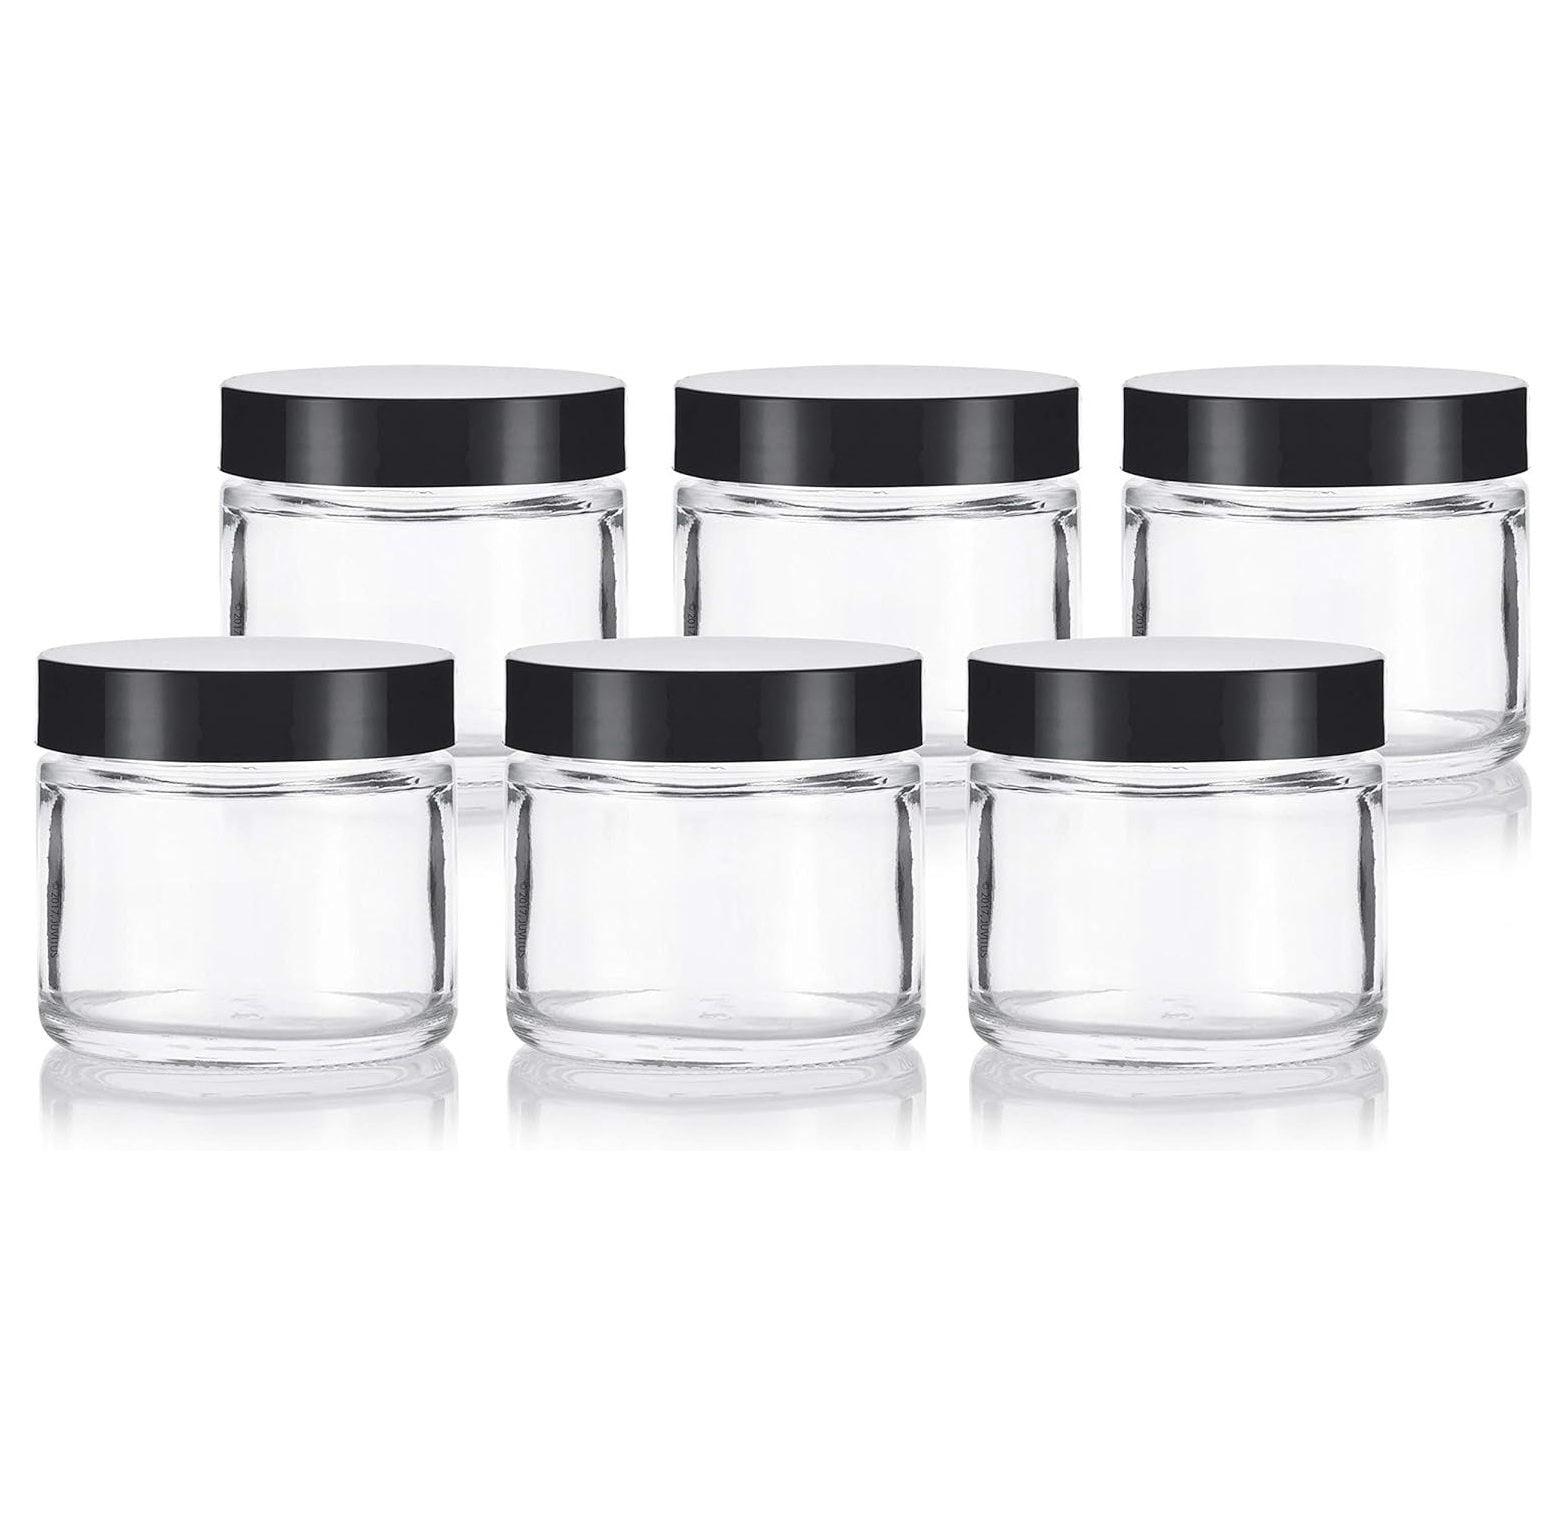 Slime Containers with Lids - 8 Pack Clear Plastic Jars for Kids